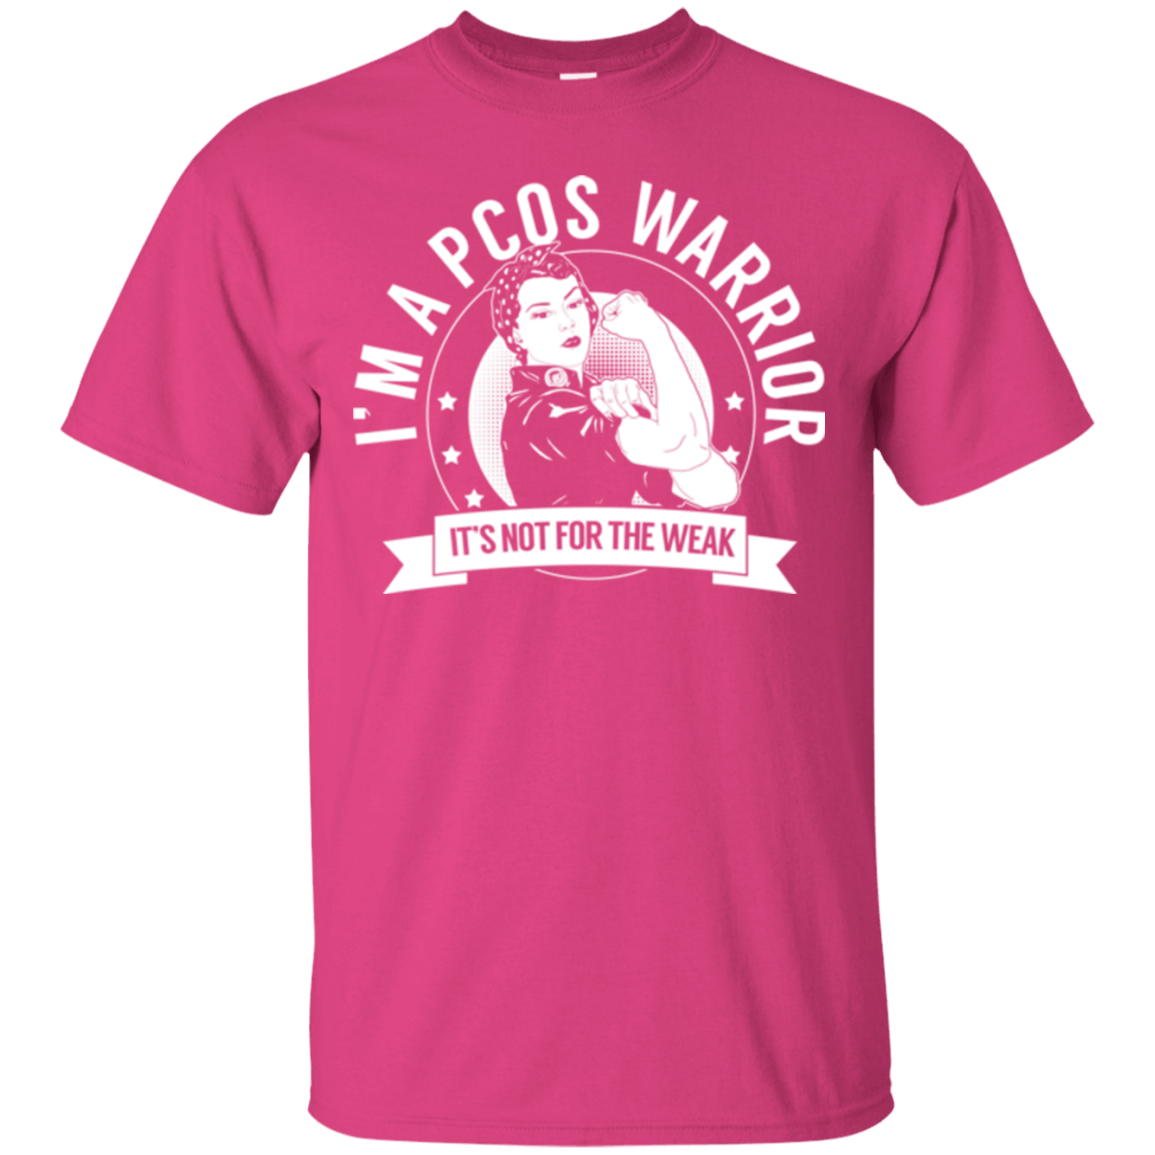 Polycystic Ovary Syndrome - PCOS Warrior Not For The Weak Cotton T-Shirt - The Unchargeables